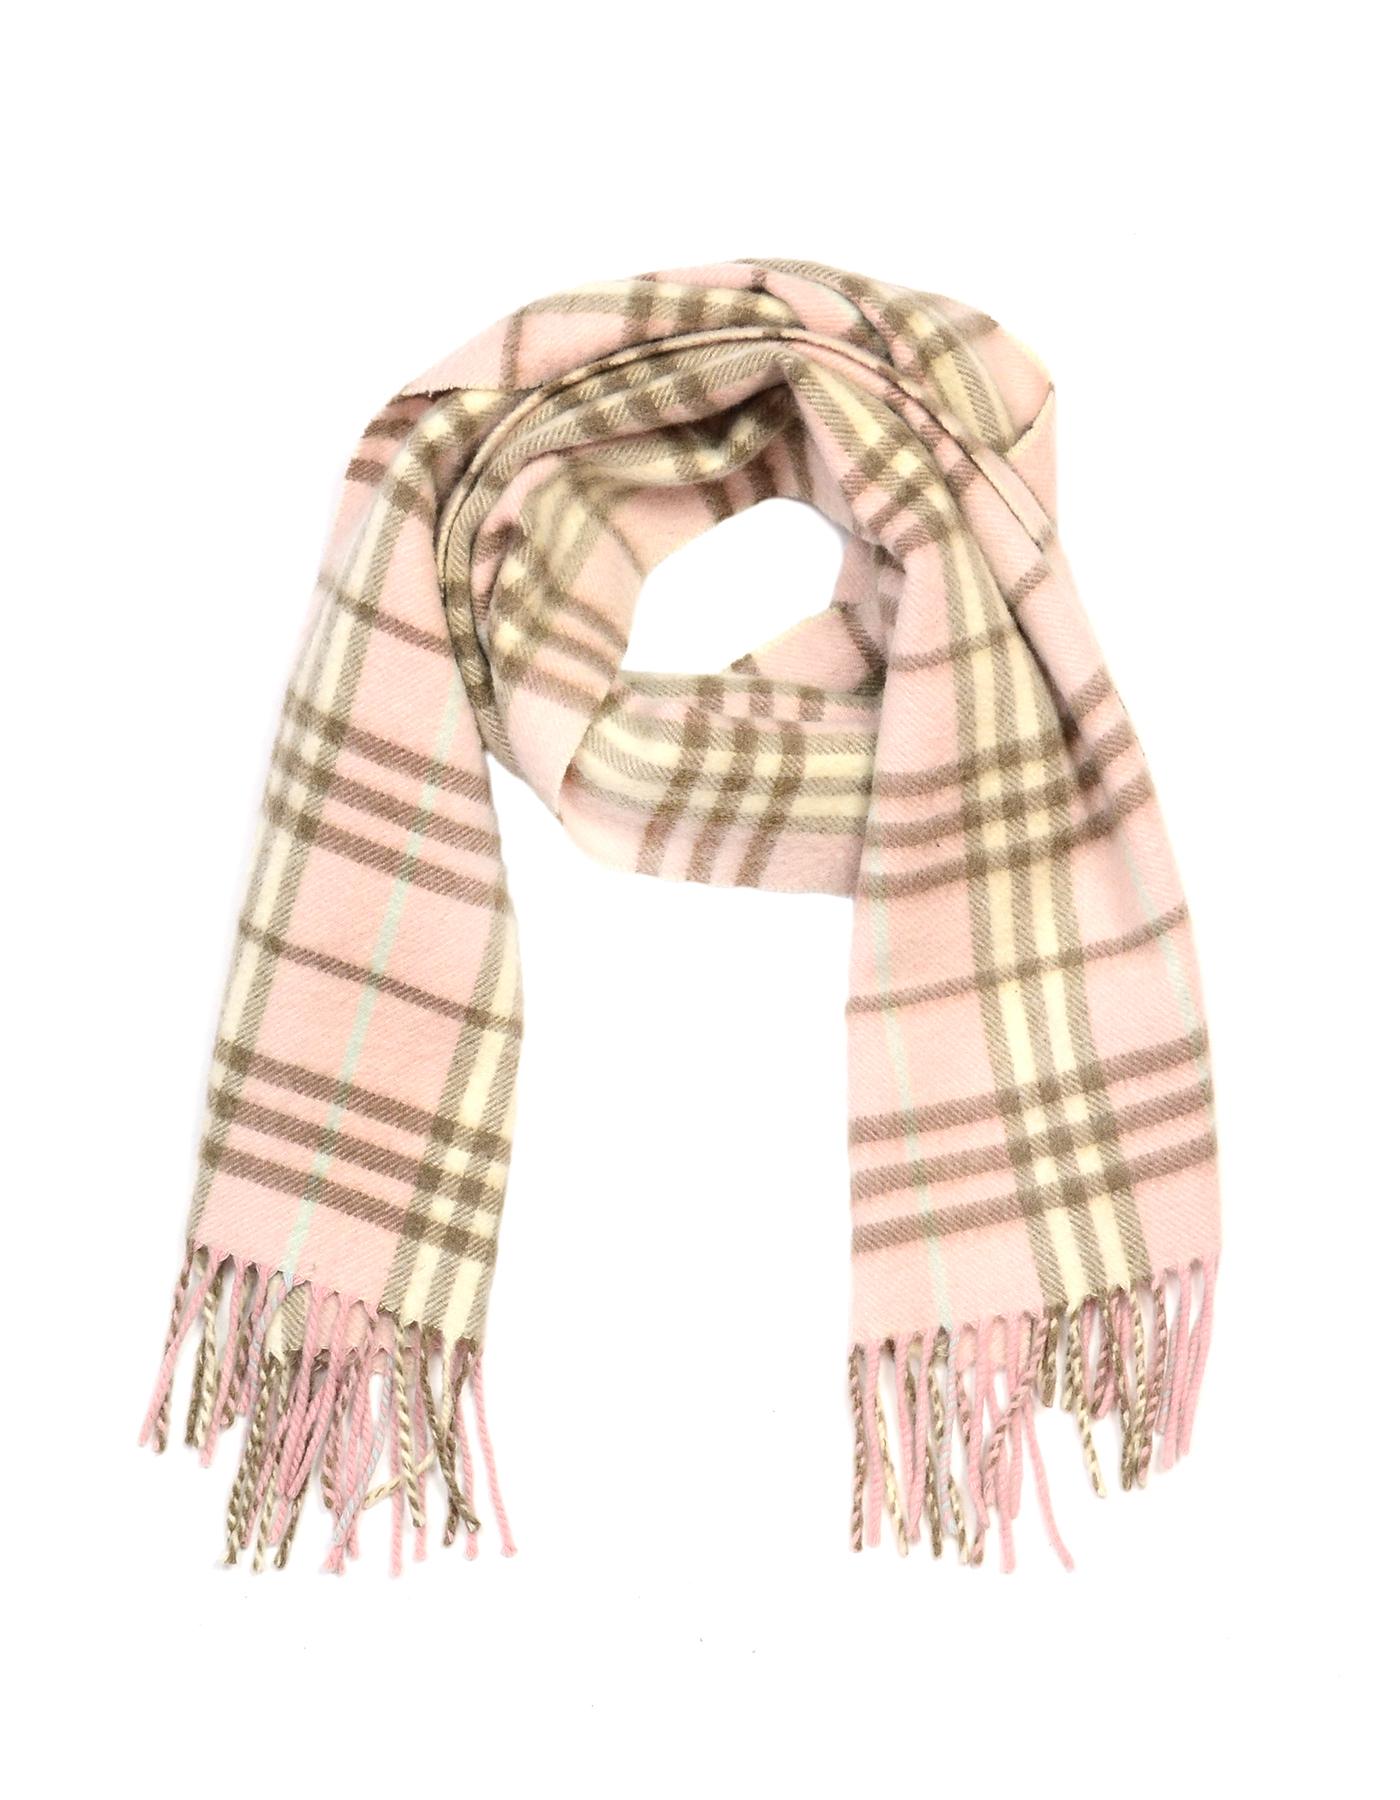 Burberry Pink/Cream/Brown Cashmere Scarf W/ Fringe

Made In: England
Color: Pink, cream, brown
Materials: 100% cashmere
Overall Condition: Excellent pre-owned condition 

Measurements: 
11.9